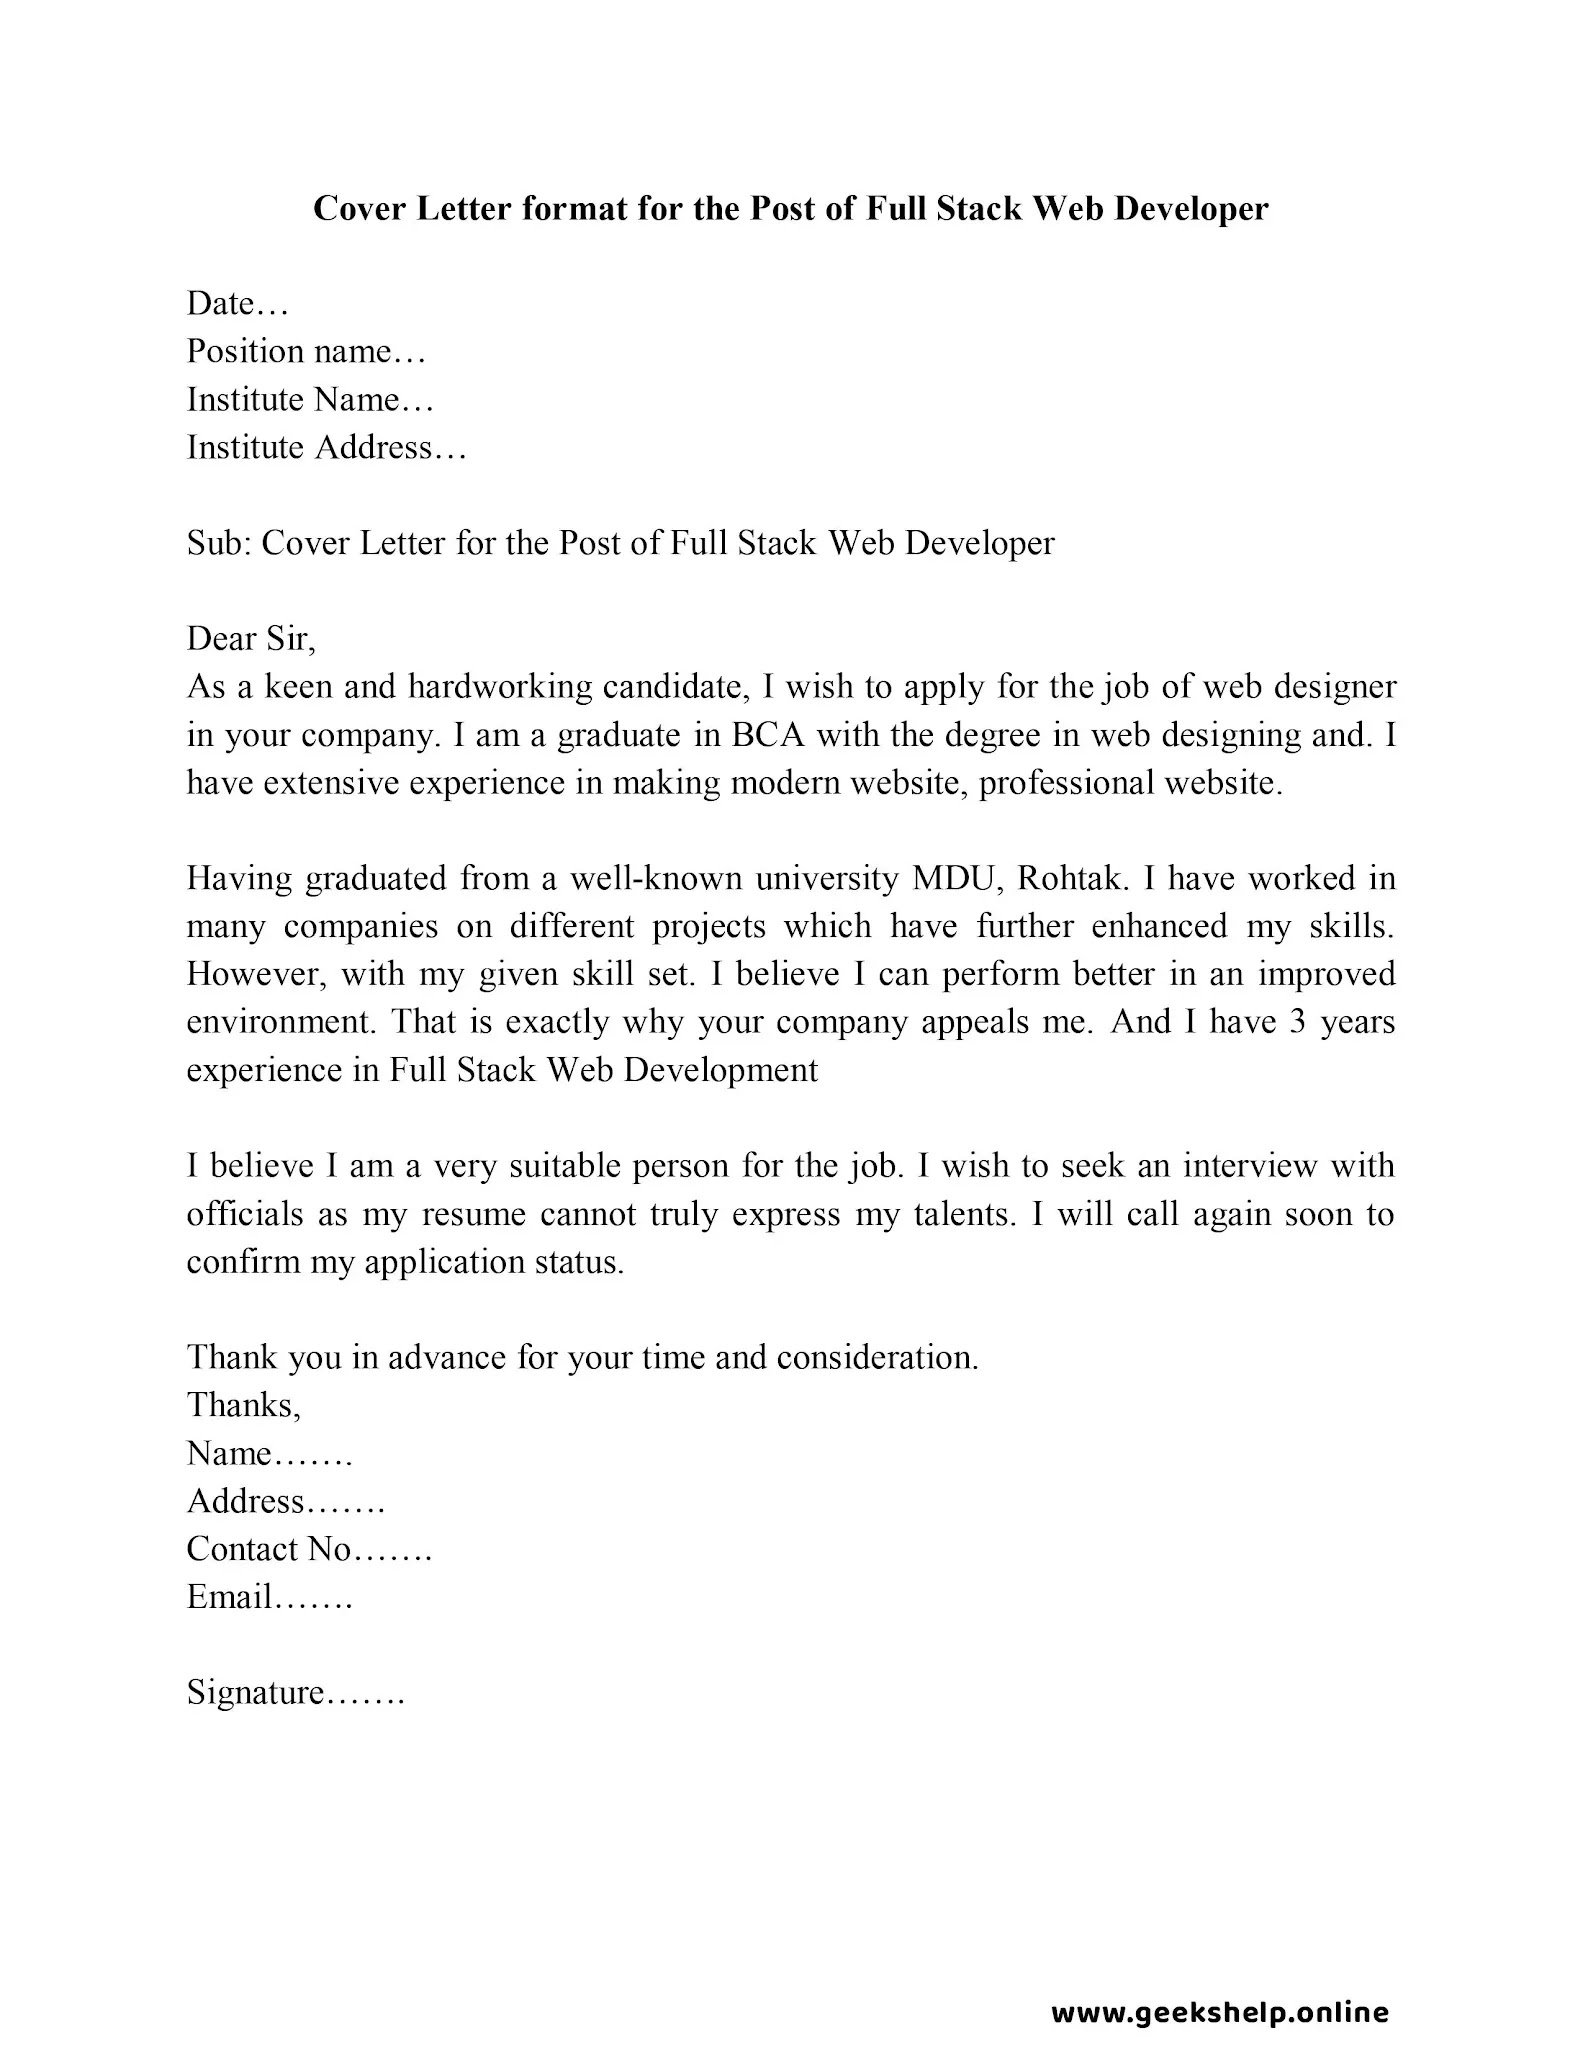 Free cover letter template Word, simple cover letter template free